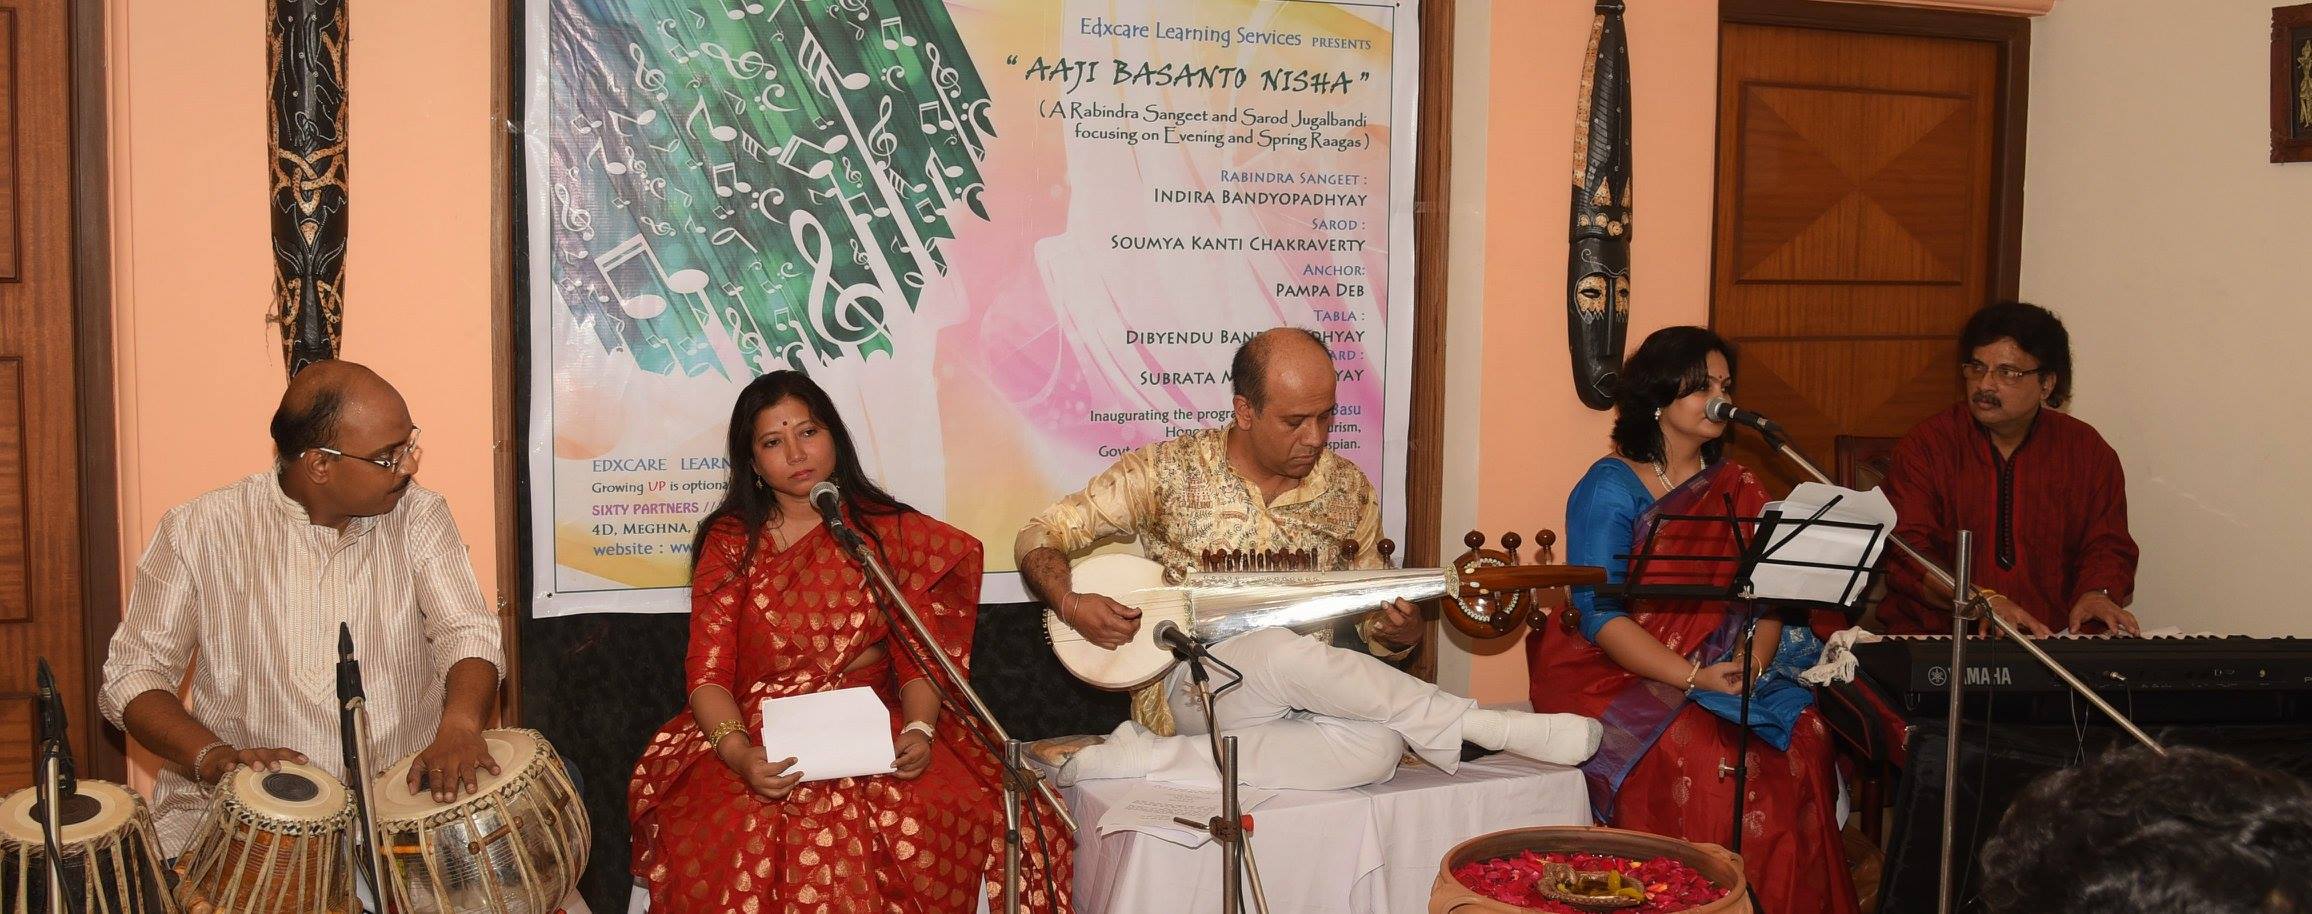 A man playing an instrument while two women sing.